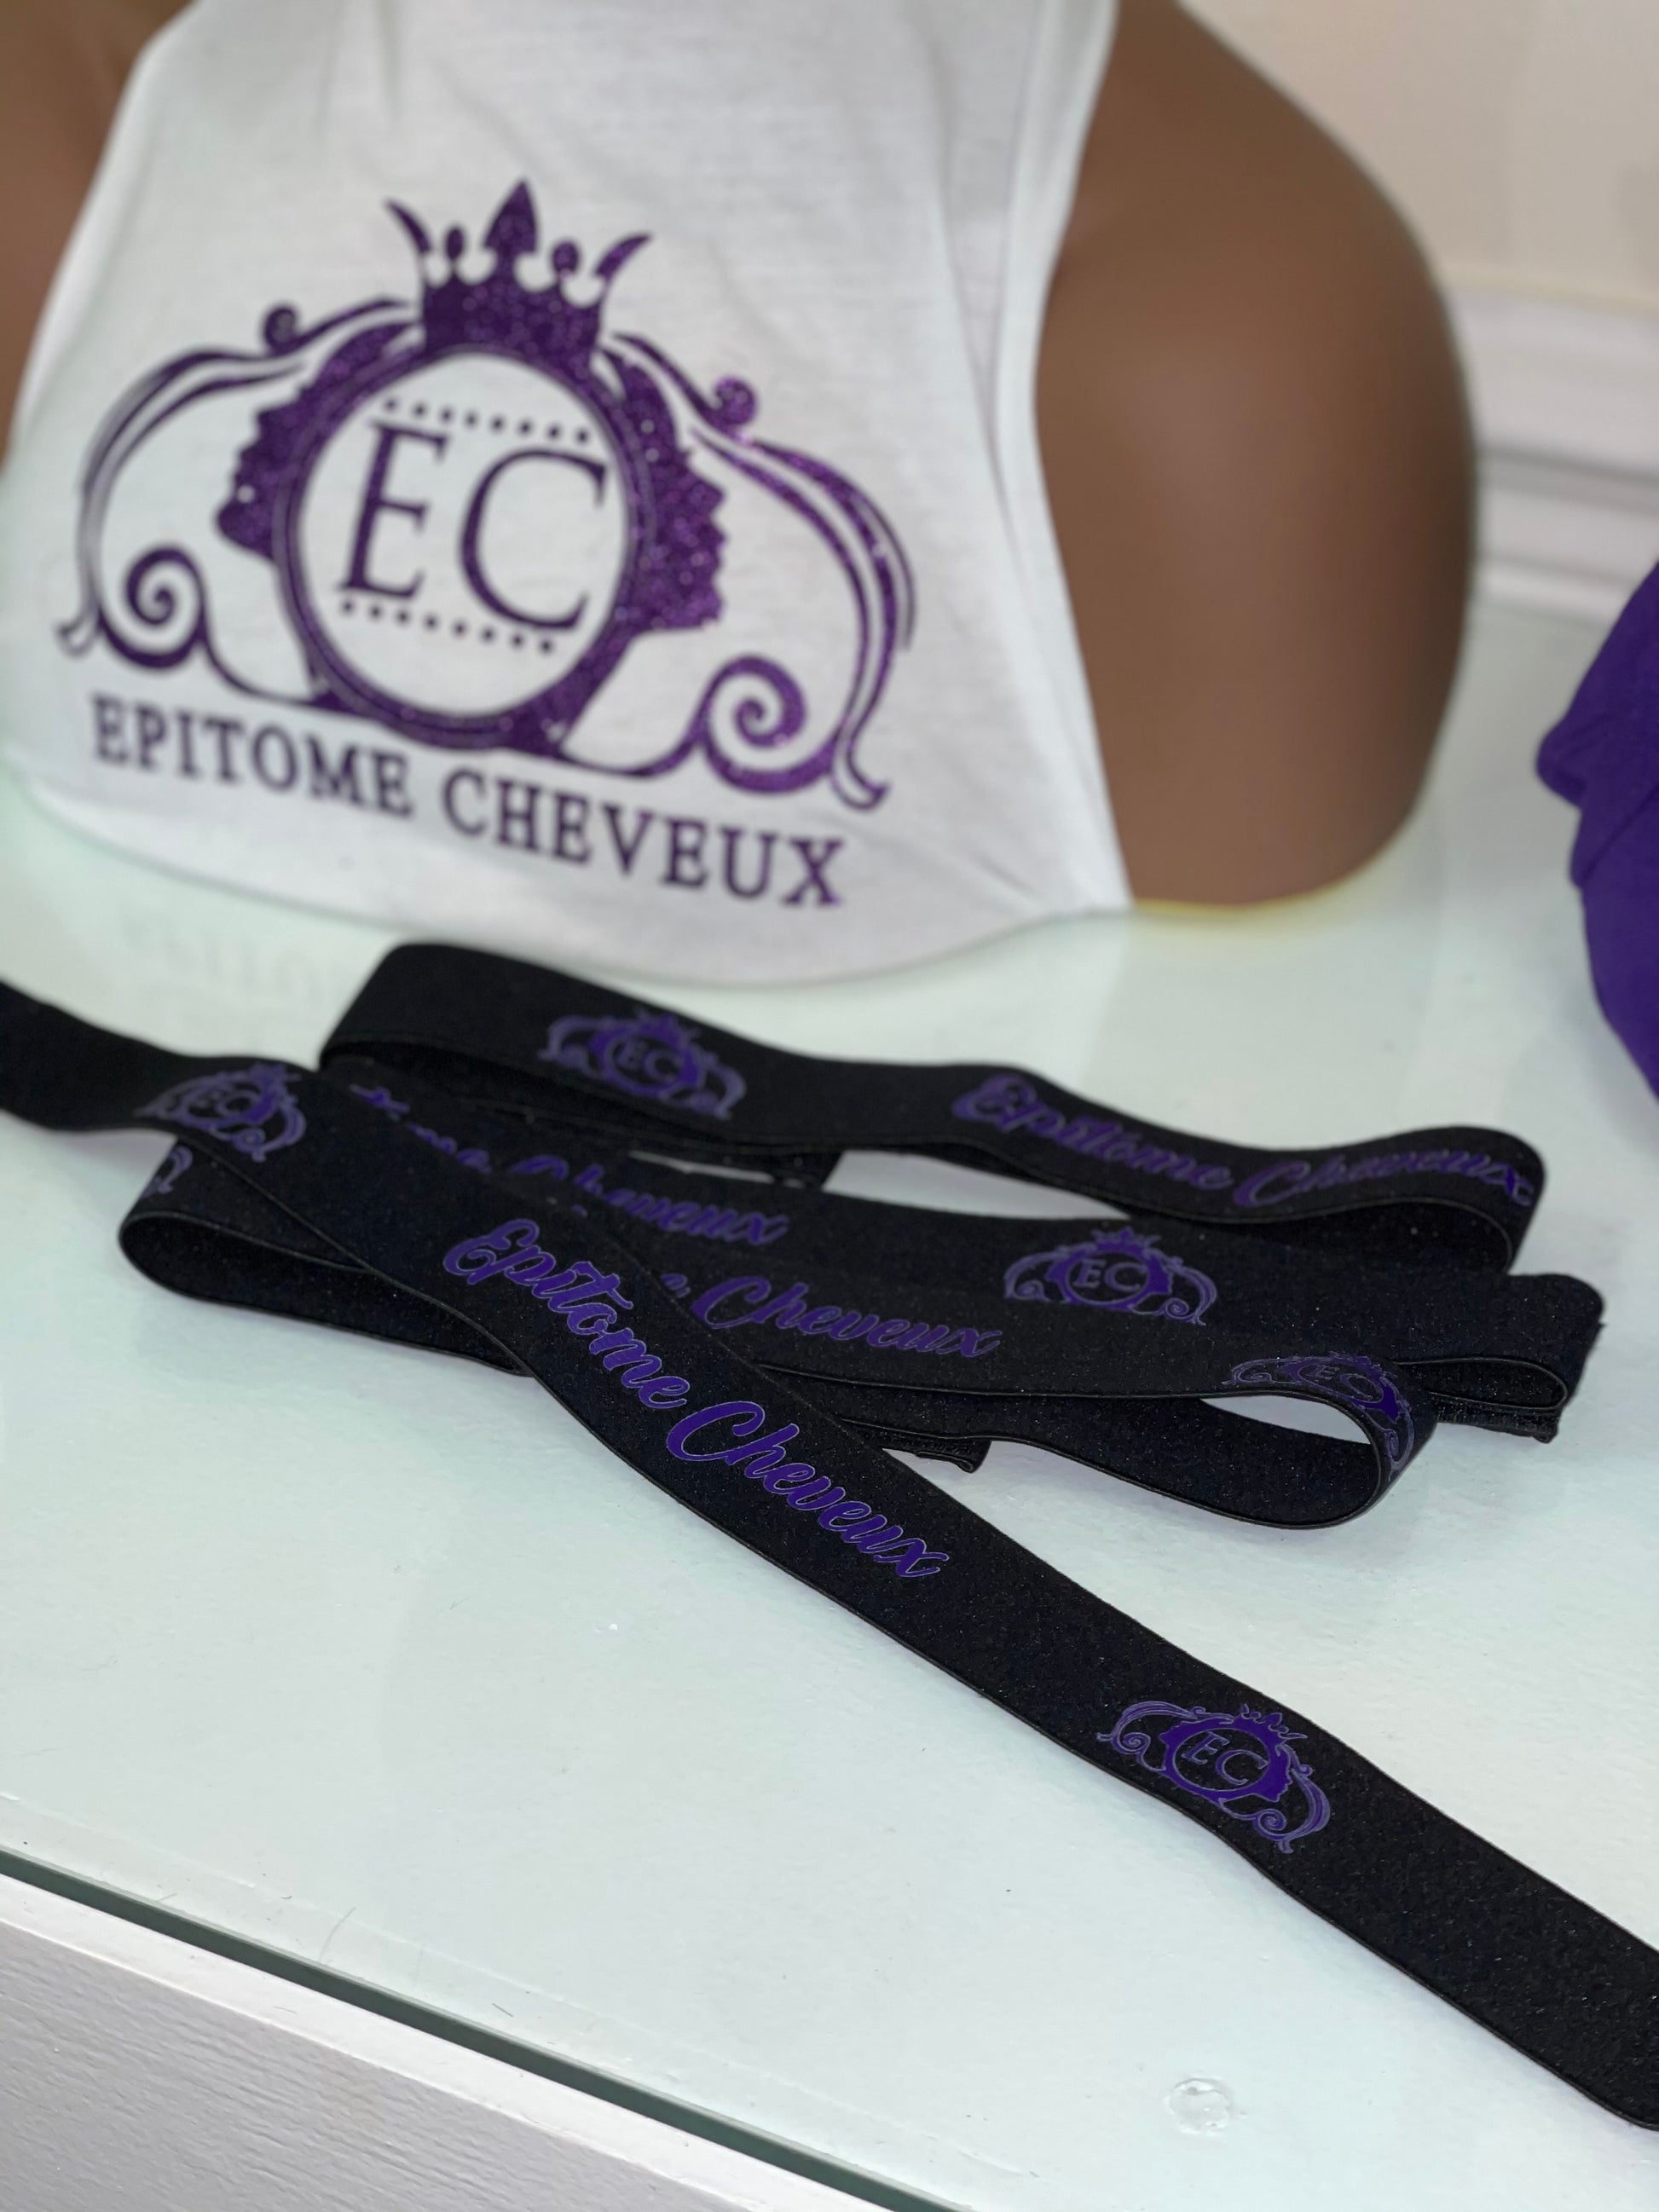 Sweat Proof Lace Band – Epitome Cheveux